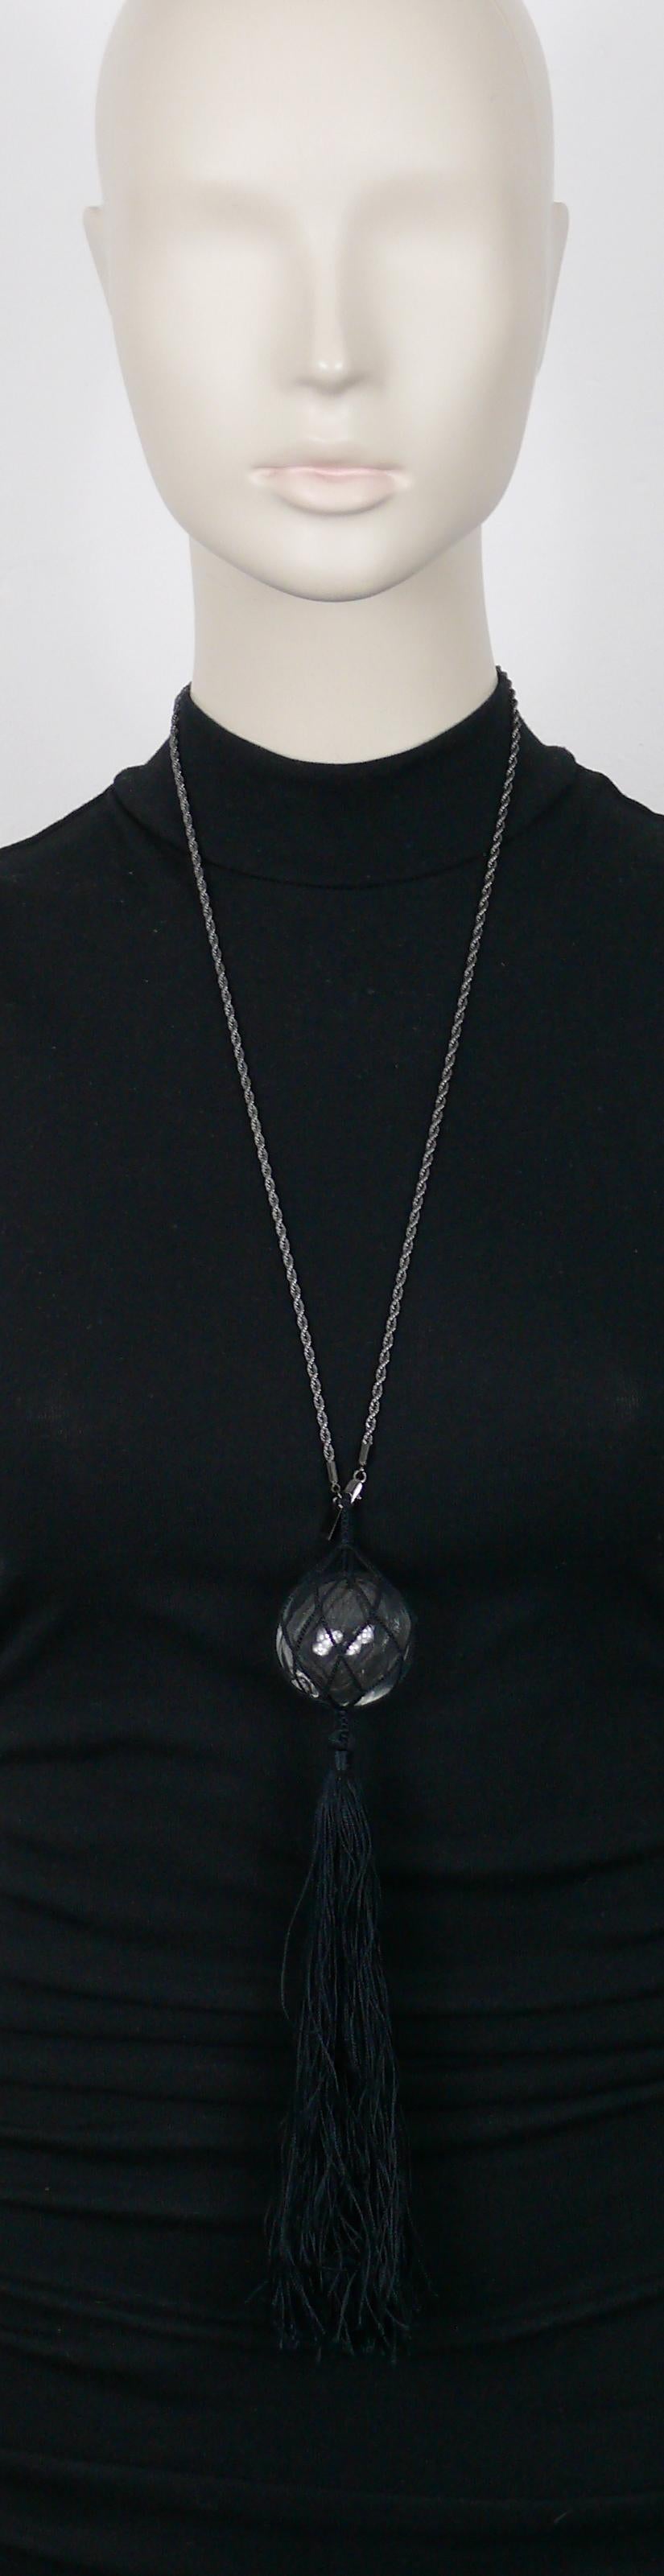 JEAN PAUL GAULTIER ruthenium color metal chain necklace featuring a clear glass ball net pendant and a long black tassel.

Slips on (no closure system).

Embossed JEAN PAUL GAULTIER.

Indicative measurements : wearable length (including tassel)